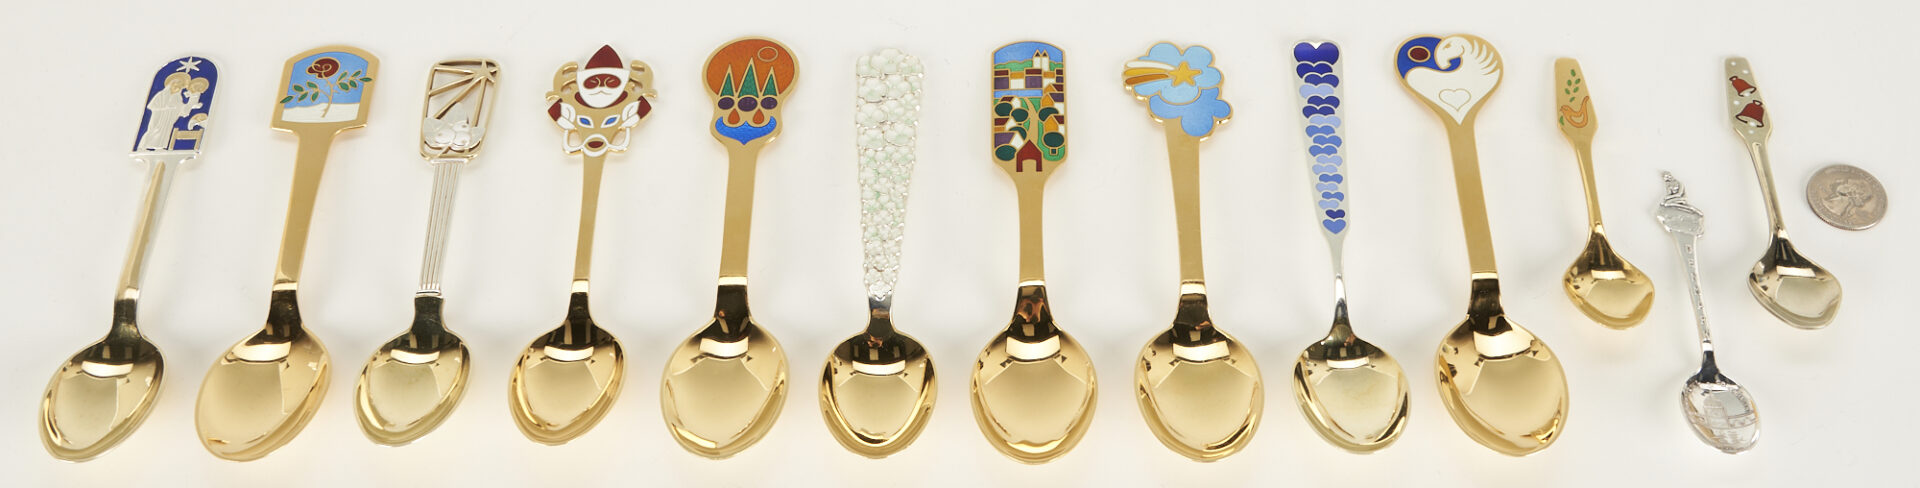 Lot 1107: 10 Michelsen Gilded Sterling Christmas Spoons, 1934-1988 plus 3 Assorted